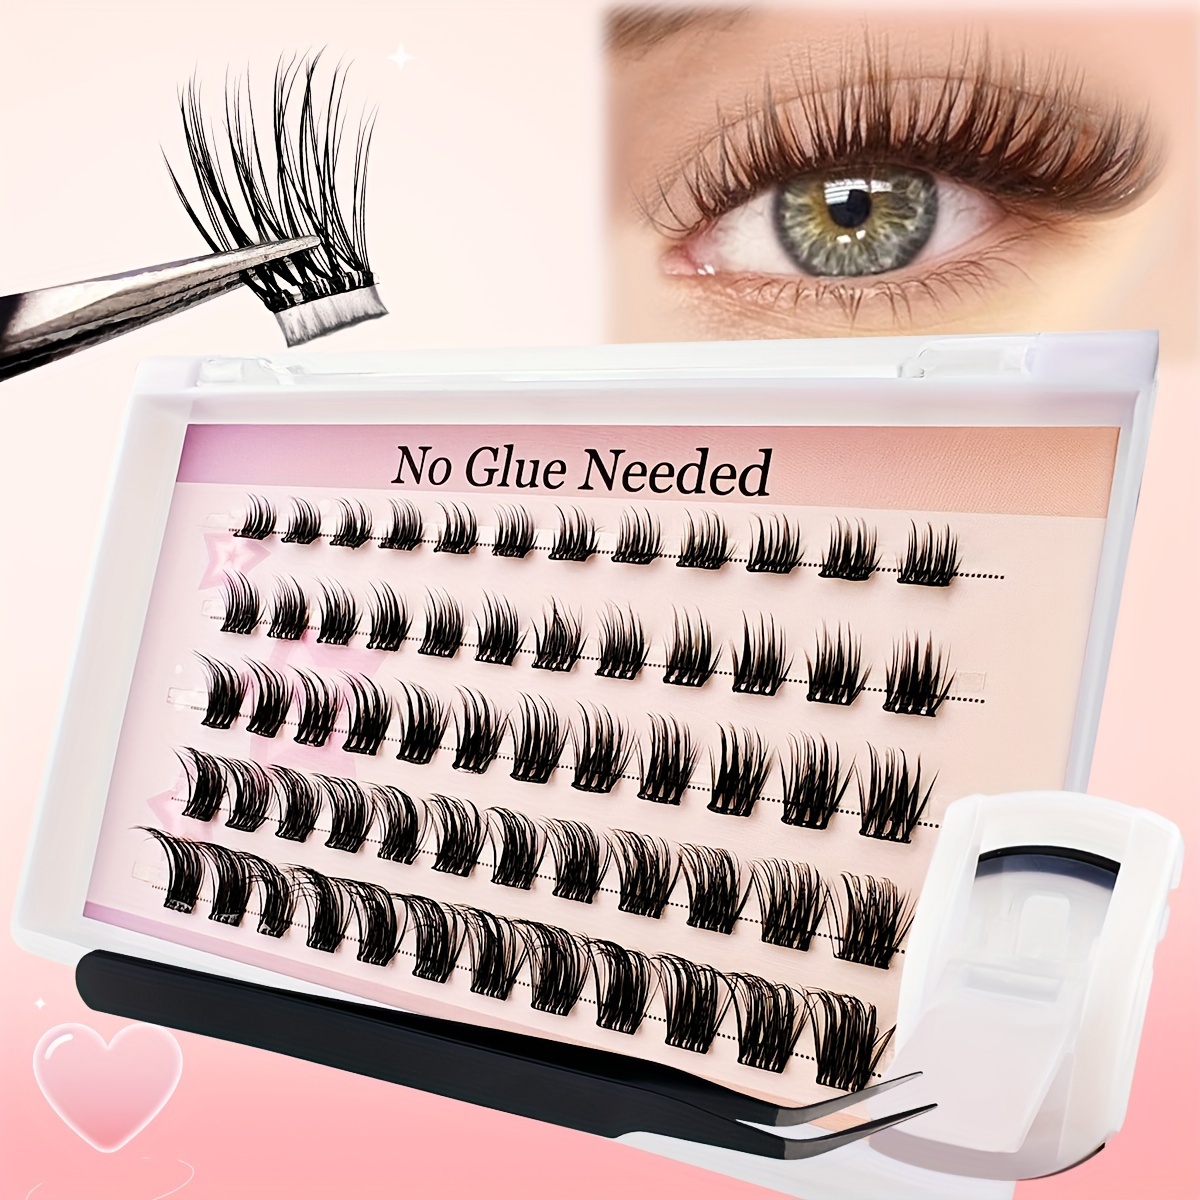 

Self Adhesive Lash Clusters Kit Press-on Diy Lash Extension Reusable Cluster Lashes Fuss Free No Sticky Residue Self Application At Home 8-16mm 60 Pcs